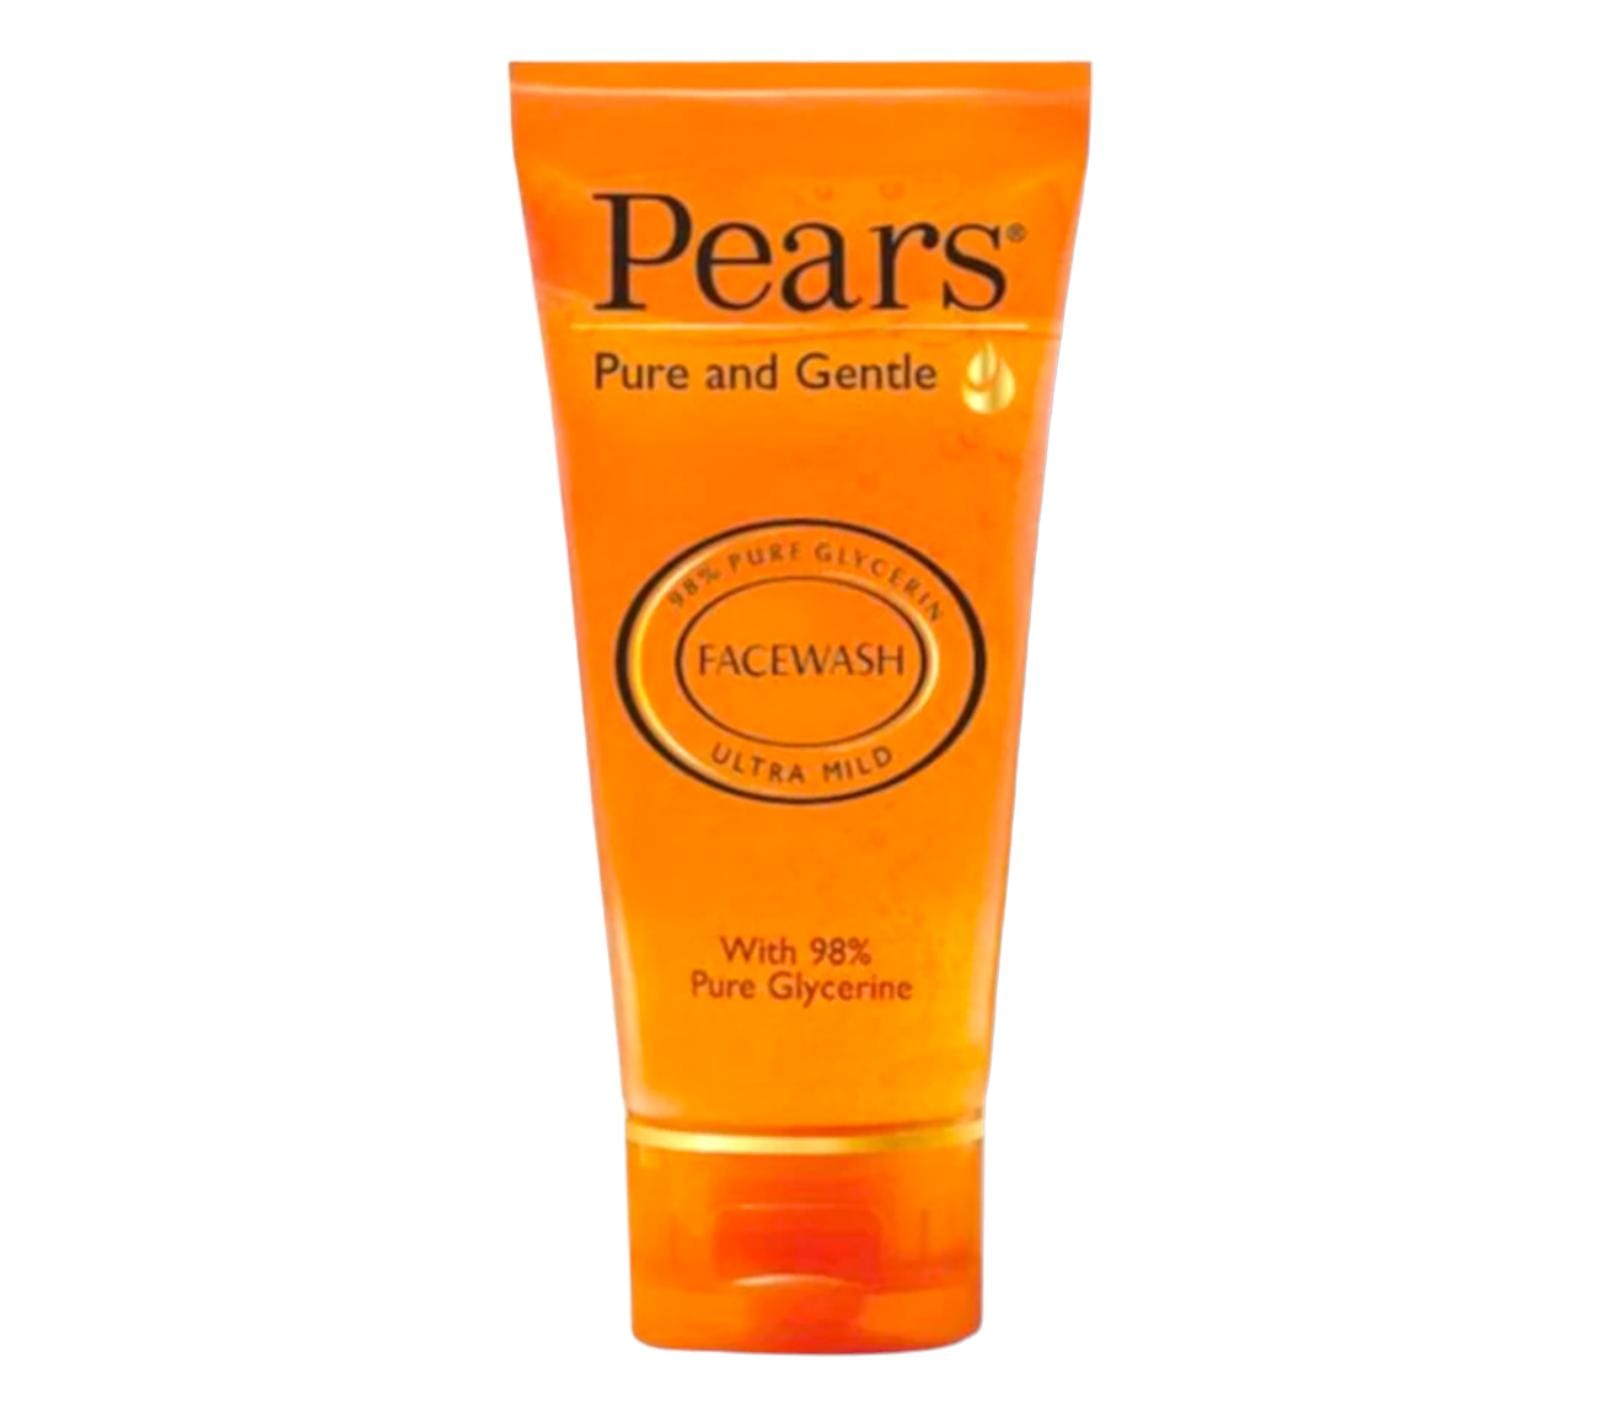 Pears Face wash